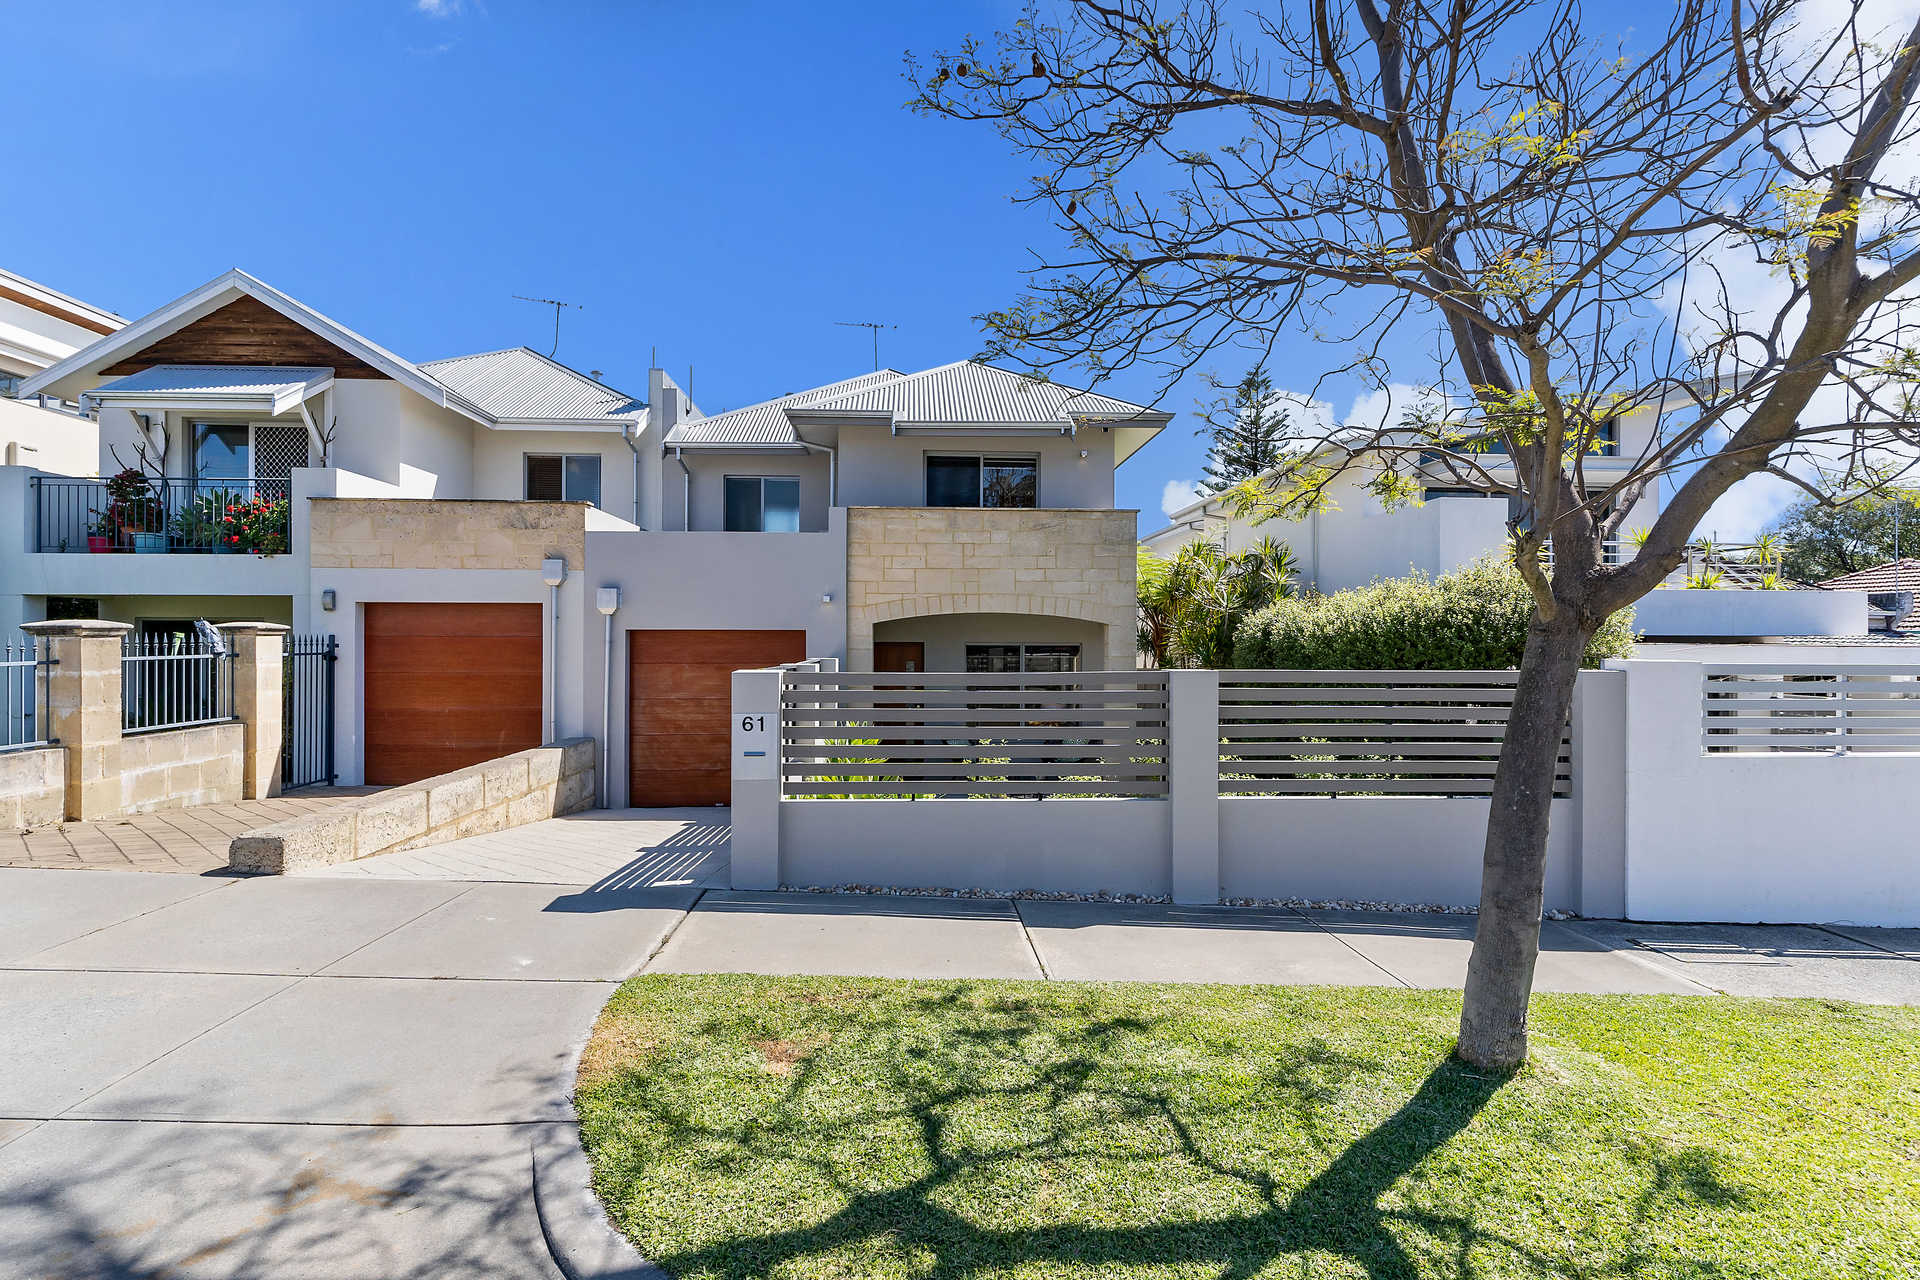 Welcome to 61 Monmouth Street, Mt Lawley